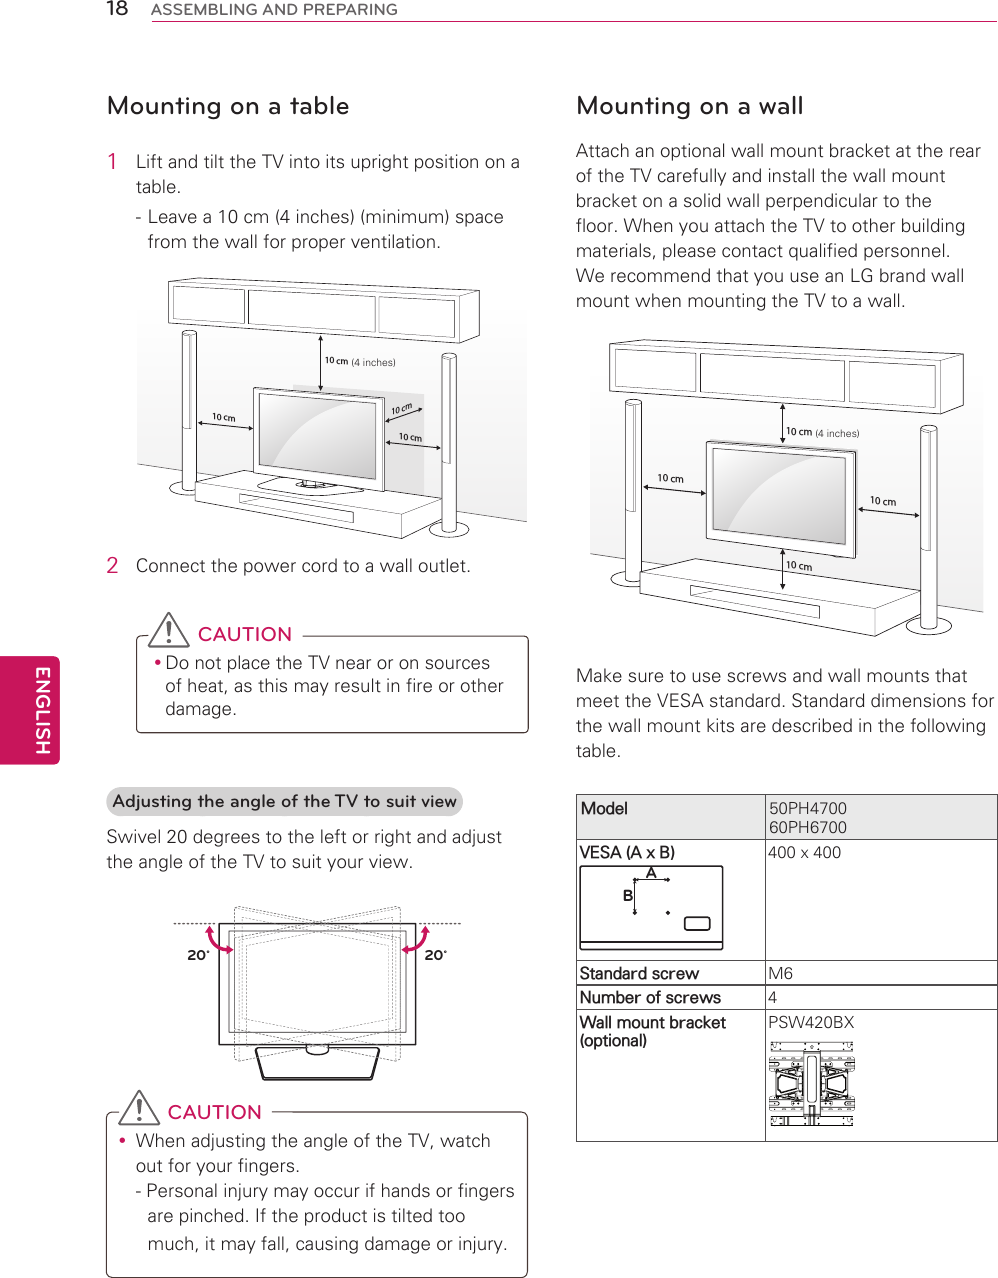 18ENGENGLISHASSEMBLING AND PREPARINGMounting on a table1  Lift and tilt the TV into its upright position on a table. - Leave a 10 cm (4 inches) (minimum) space from the wall for proper ventilation.10 cm10 cm10 cm10 cm(4 inches)2  Connect the power cord to a wall outlet. CAUTION yDo not place the TV near or on sources of heat, as this may result in fire or other damage.Adjusting the angle of the TV to suit viewSwivel 20 degrees to the left or right and adjust the angle of the TV to suit your view.20˚20˚ CAUTION yWhen adjusting the angle of the TV, watch out for your fingers.- Personal injury may occur if hands or fingers are pinched. If the product is tilted too much, it may fall, causing damage or injury.Mounting on a wallAttach an optional wall mount bracket at the rear of the TV carefully and install the wall mount bracket on a solid wall perpendicular to the floor. When you attach the TV to other building materials, please contact qualified personnel.We recommend that you use an LG brand wall mount when mounting the TV to a wall.10 cm10 cm10 cm10 cm Make sure to use screws and wall mounts that meet the VESA standard. Standard dimensions for the wall mount kits are described in the following table.Model 50PH470060PH6700VESA (A x B)AB400 x 400Standard screw M6Number of screws 4Wall mount bracket (optional)PSW420BX(4 inches)